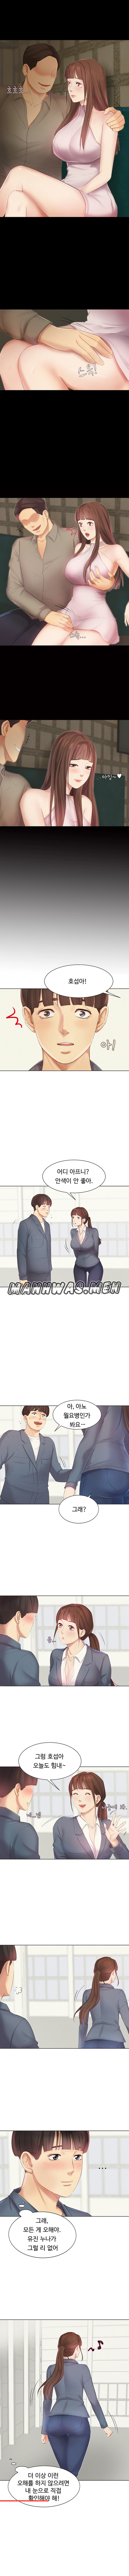 Accountancy Raw - Chapter 4 Page 3